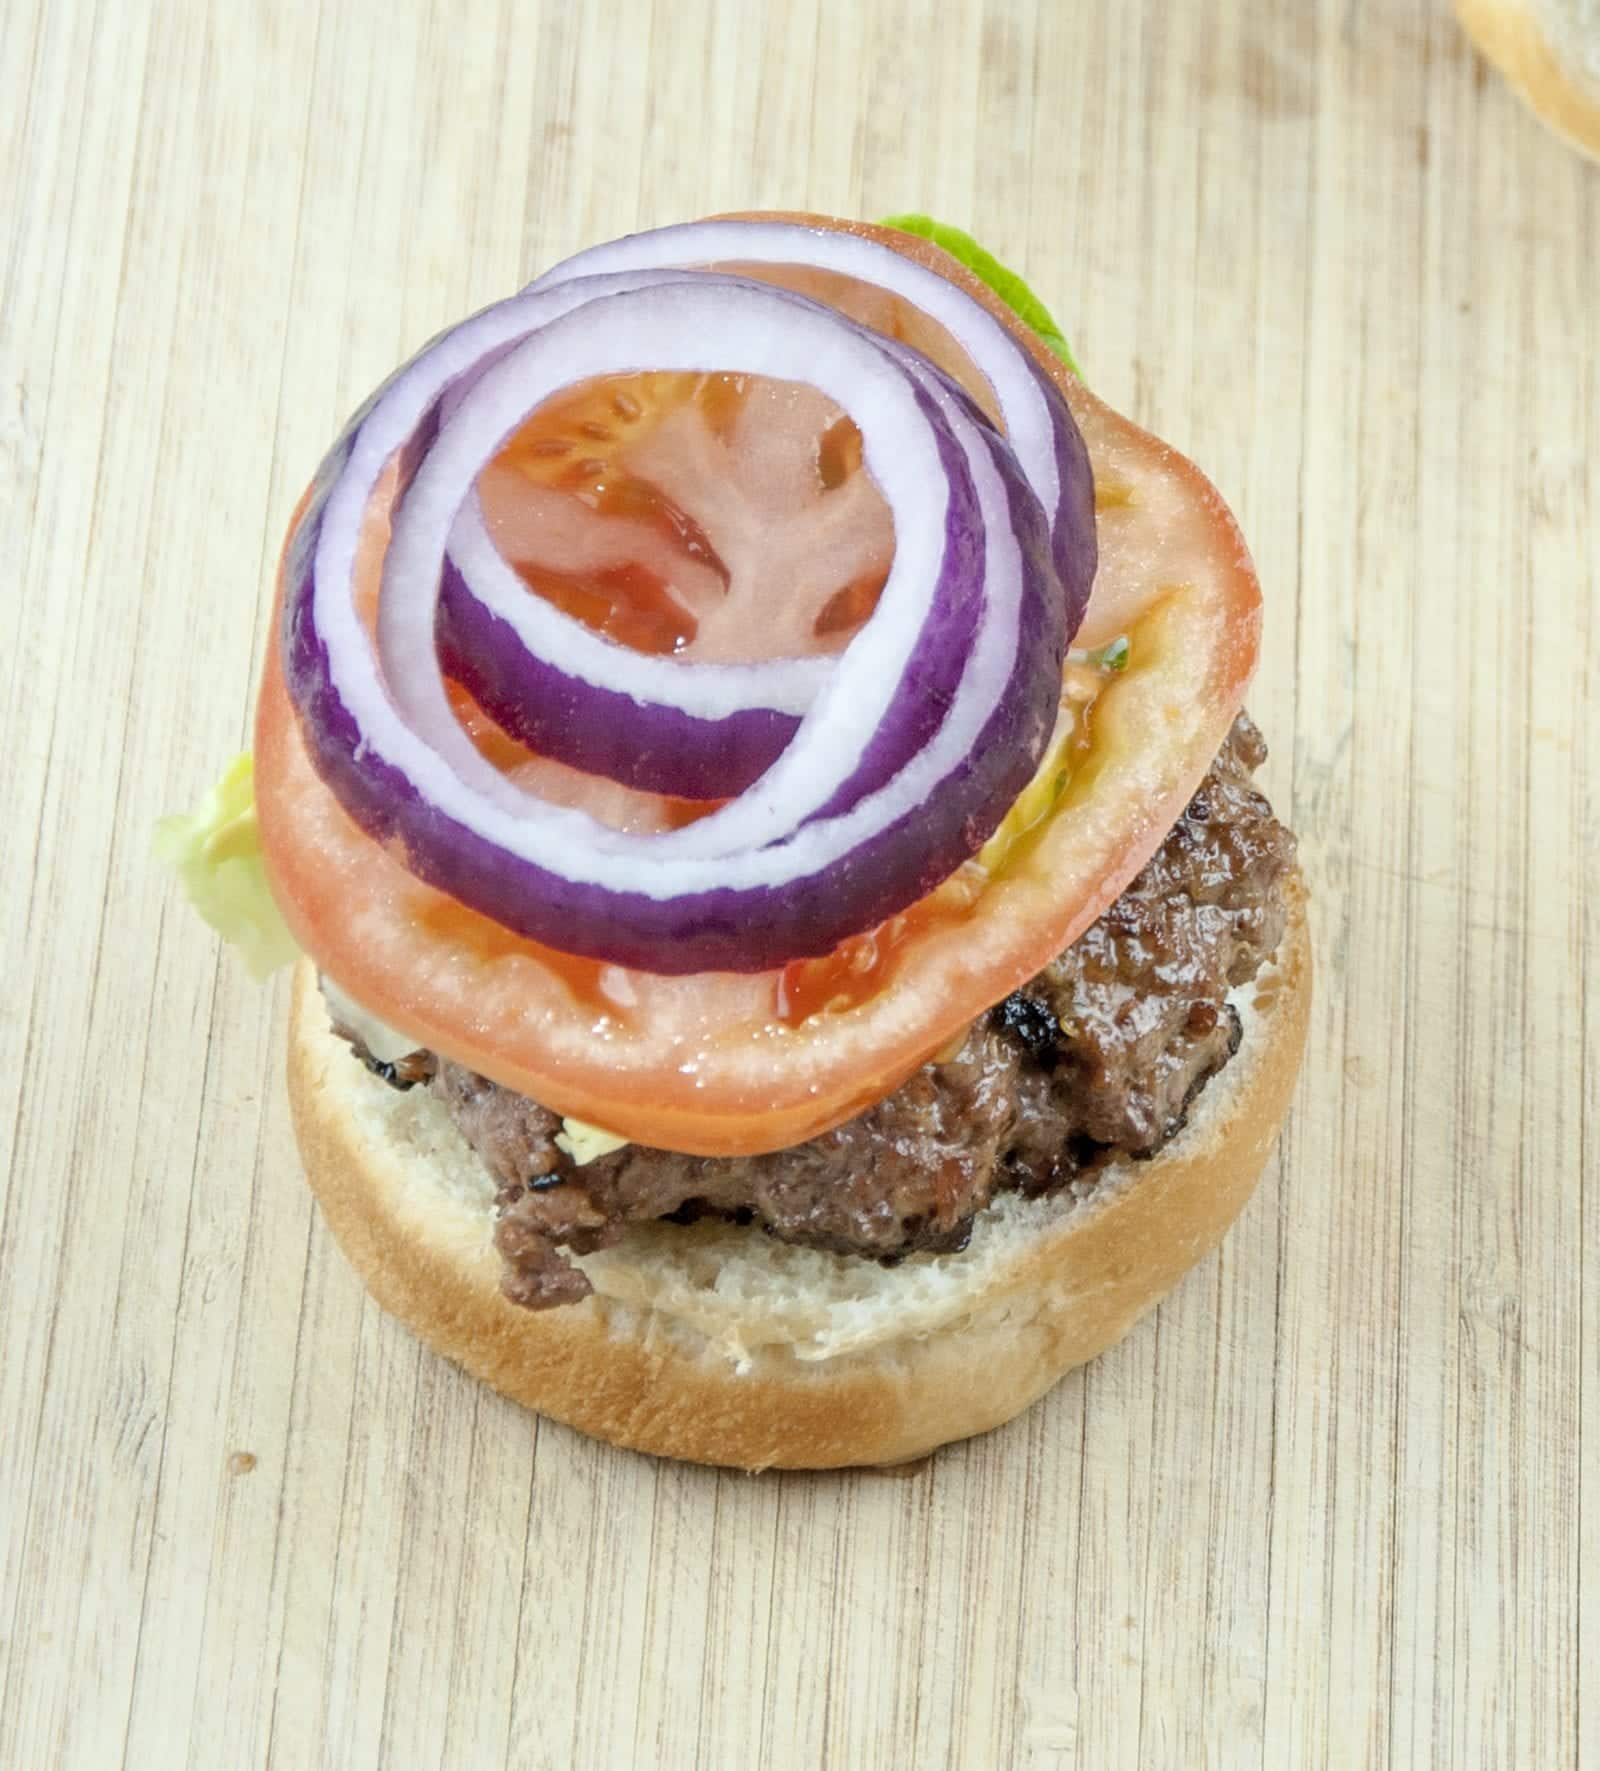 Lamb burgers are a great alternative to the traditional beef burger, and far tastier. Make them at home in no time. Try in a brioche bun with tzatziki. Yum! | theyumyumclub.com